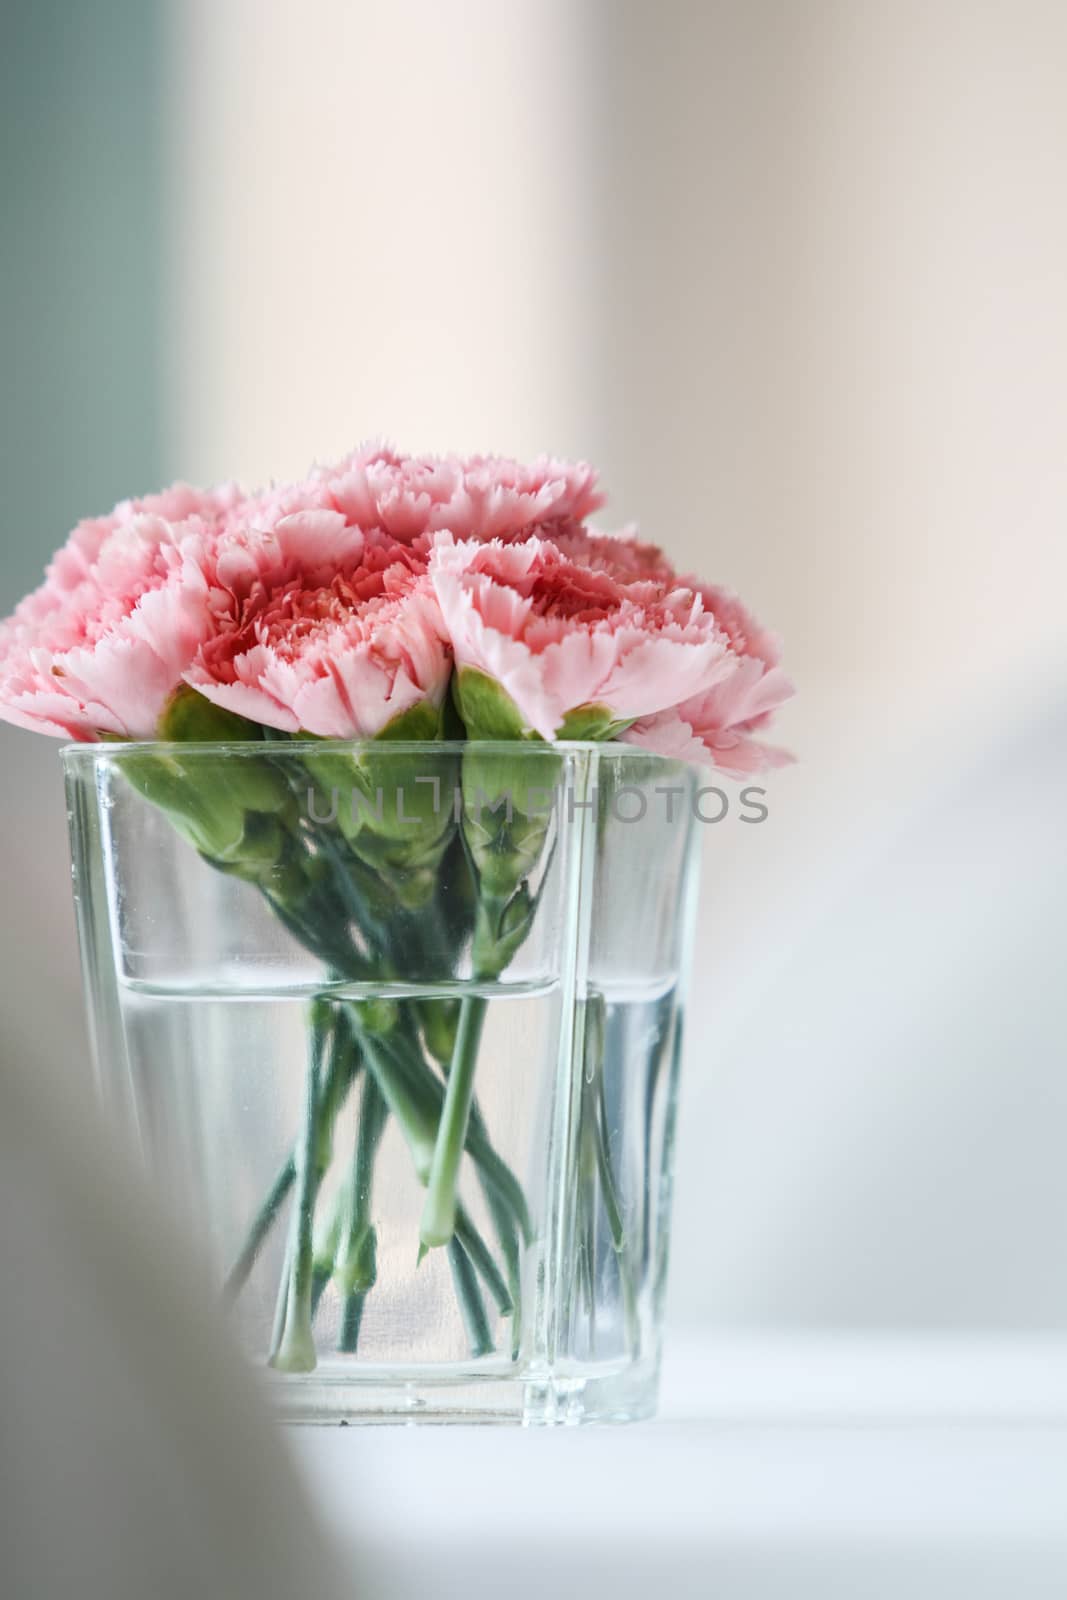 Carnation flowers by liewluck